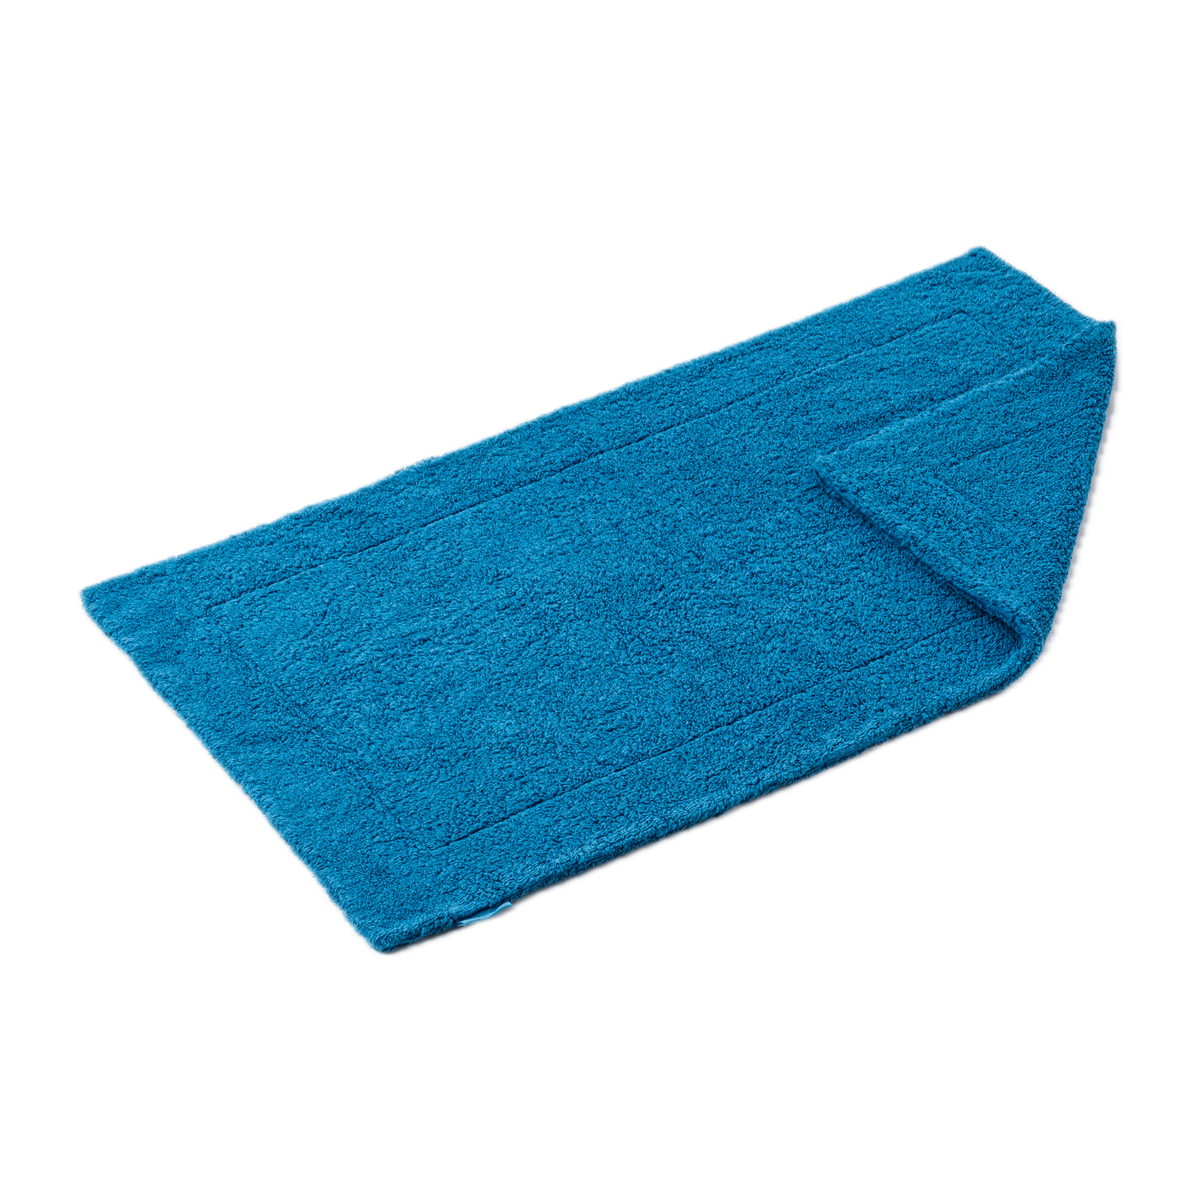 Slanted Image of Abyss Double Bath Tub Mat in Ocean (336) Color with Fold